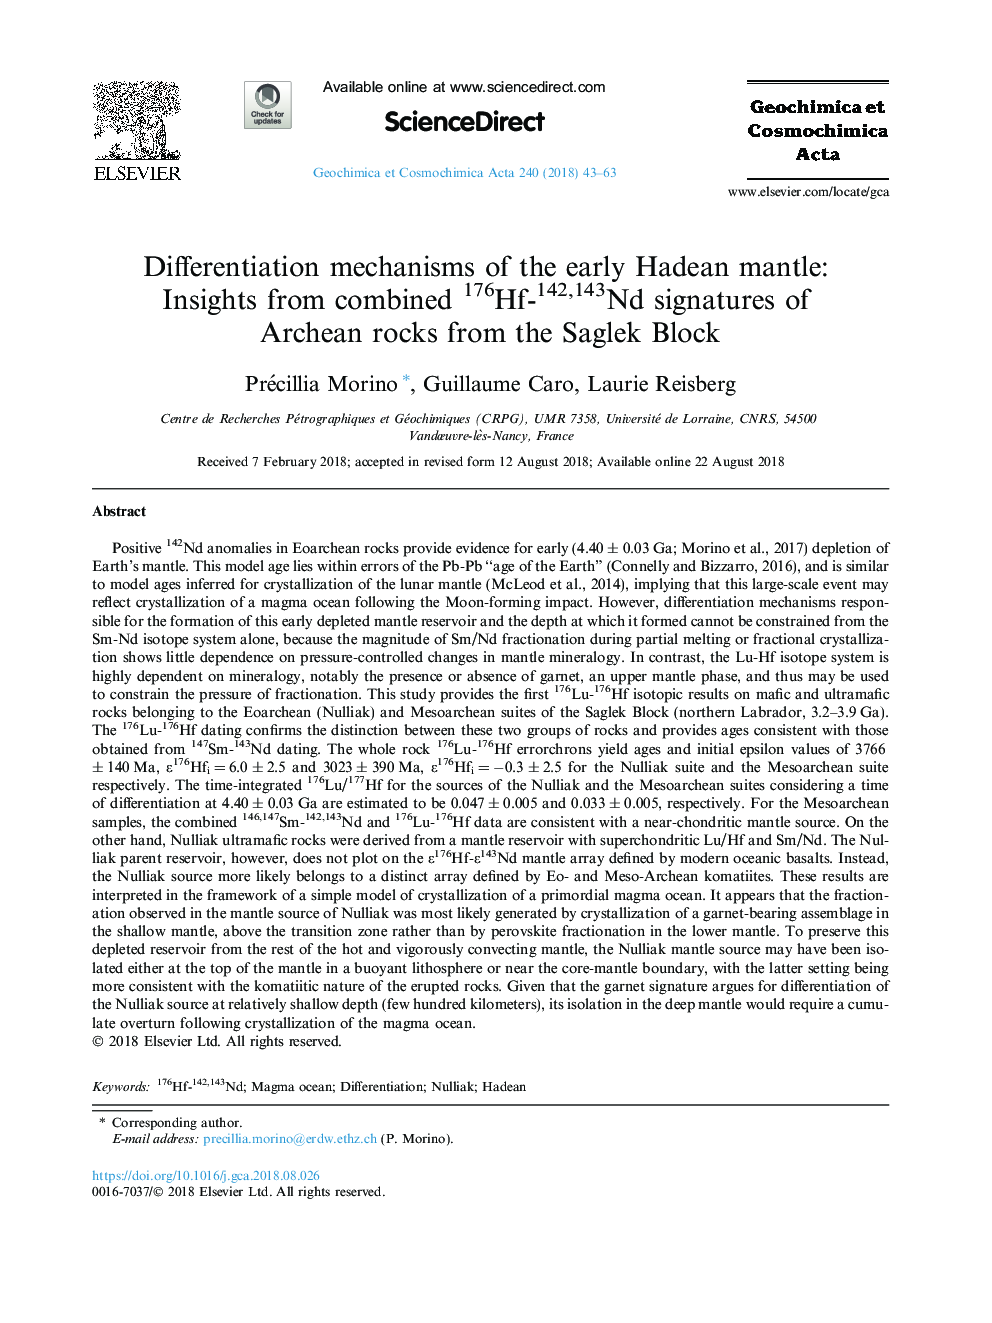 Differentiation mechanisms of the early Hadean mantle: Insights from combined 176Hf-142,143Nd signatures of Archean rocks from the Saglek Block